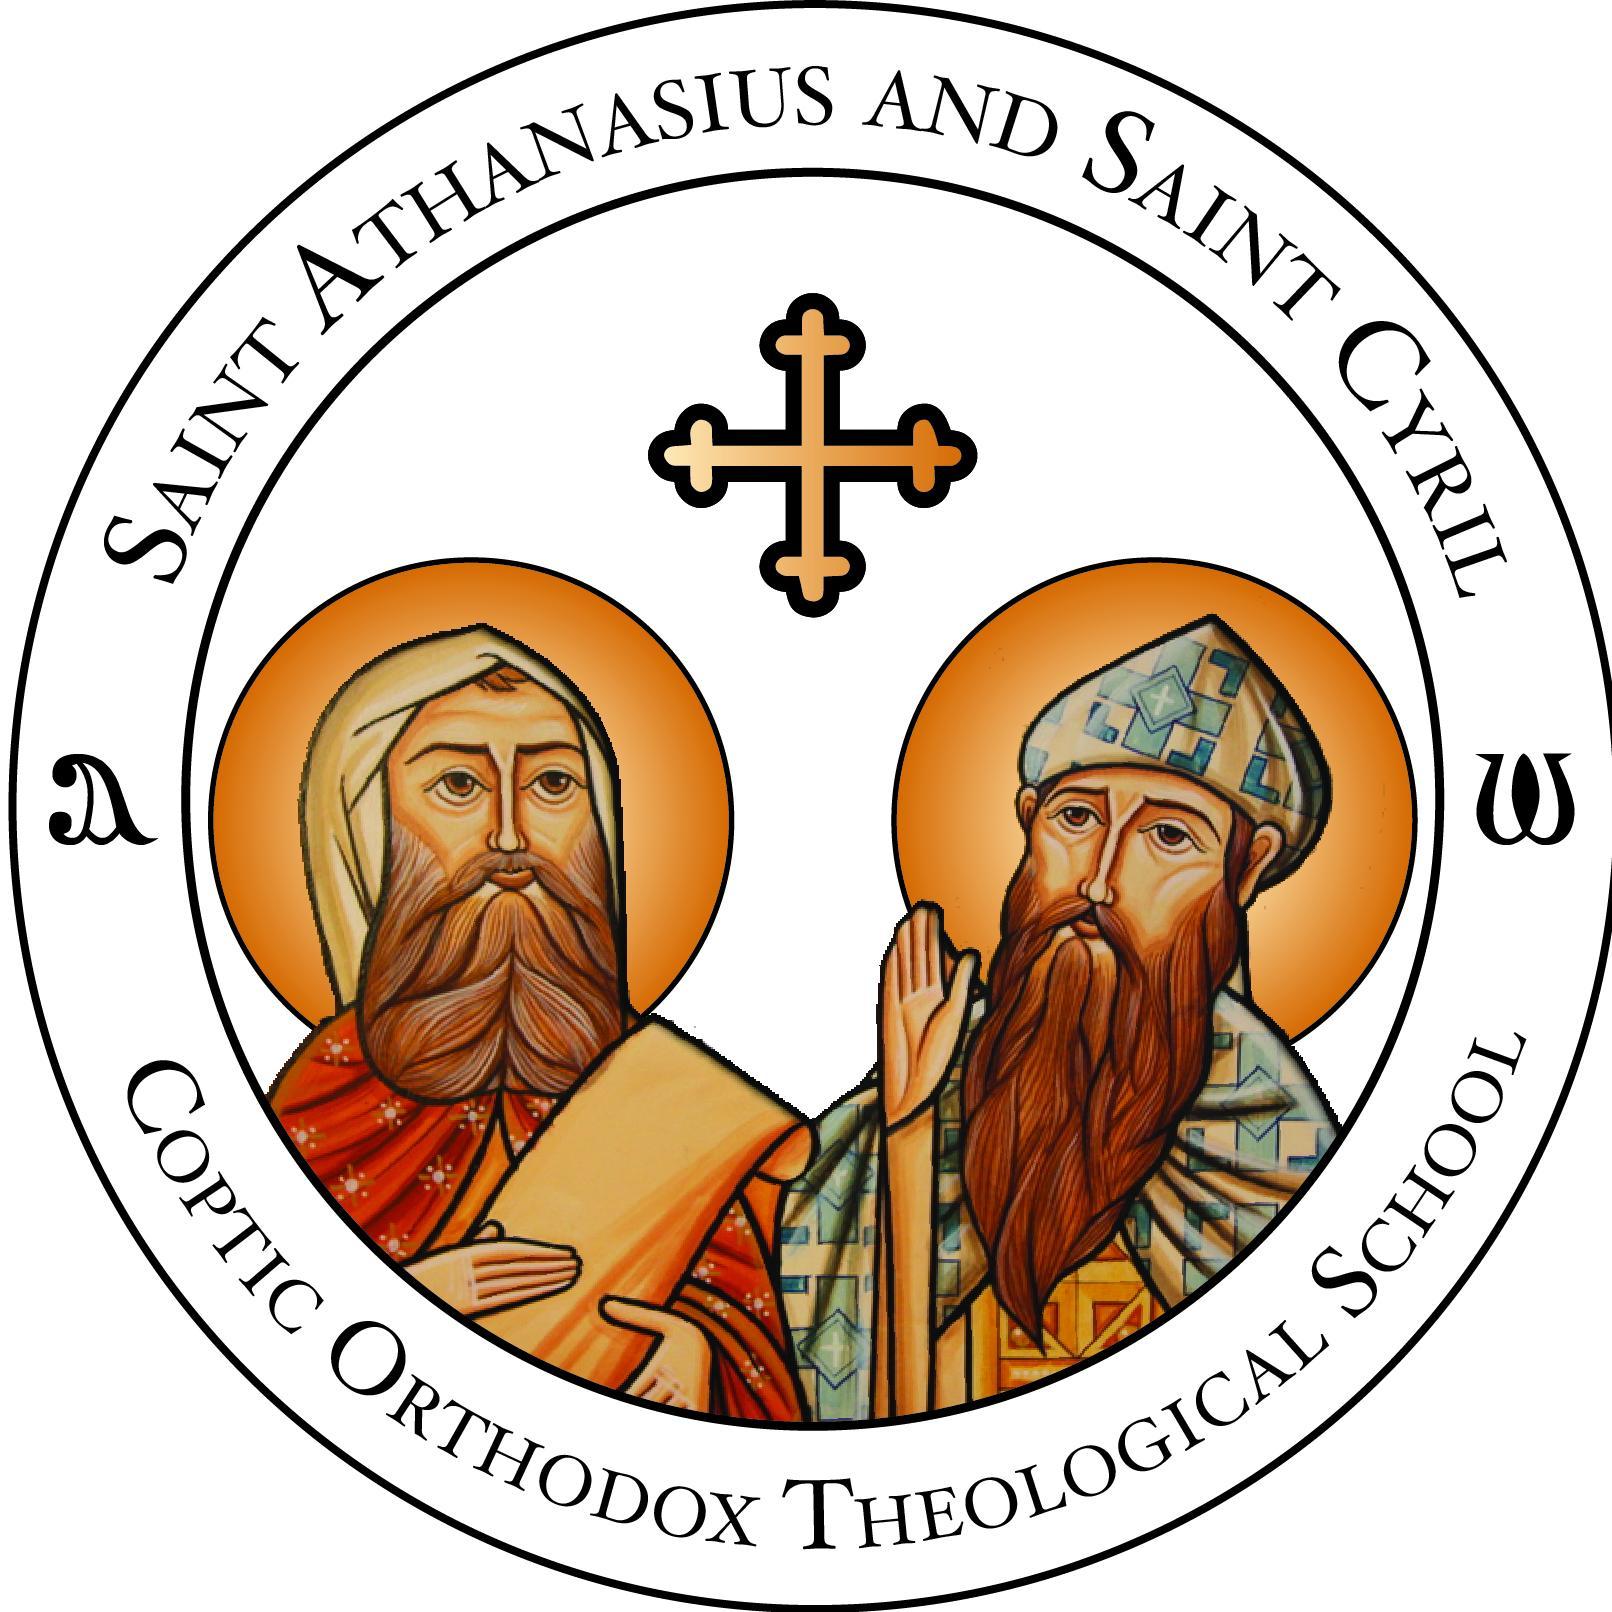 St. Athanasius and St. Cyril Theological School embraces the challenge of serving the Church and the needs of Orthodox Christians in the 21st Century.